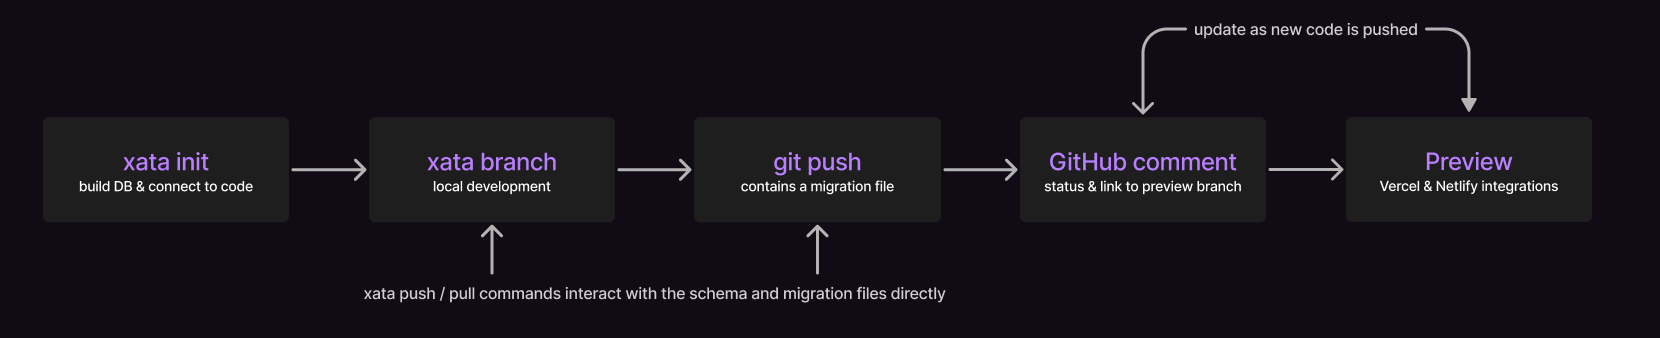 A diagram representing the end-to-end developer workflow